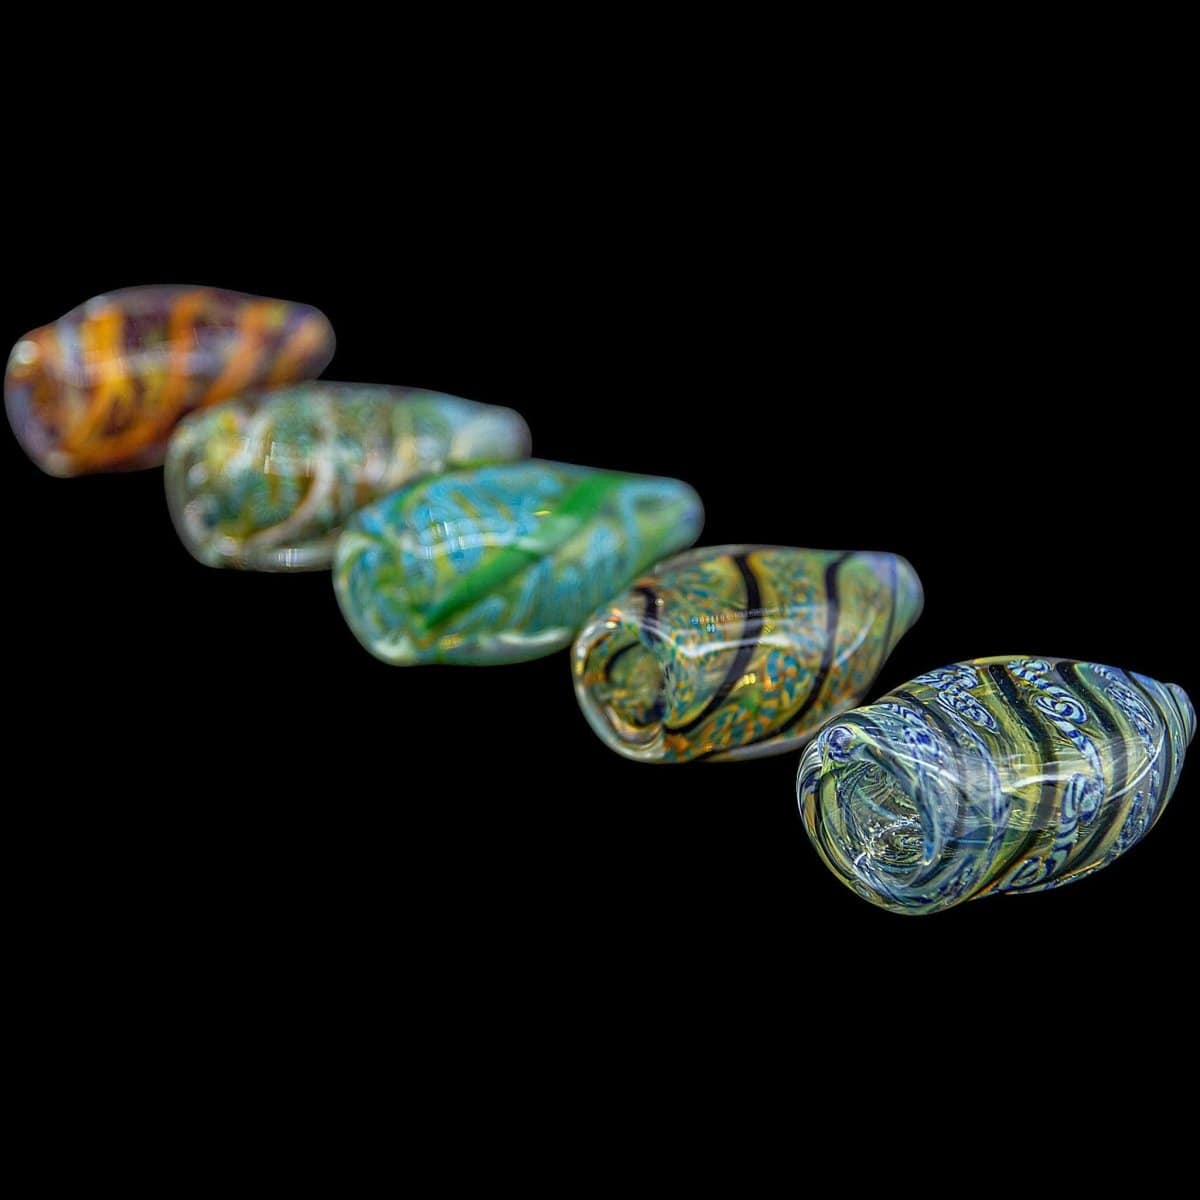 LA Pipes Hand Pipe "Skipping Stone" Inside-Out Chillum